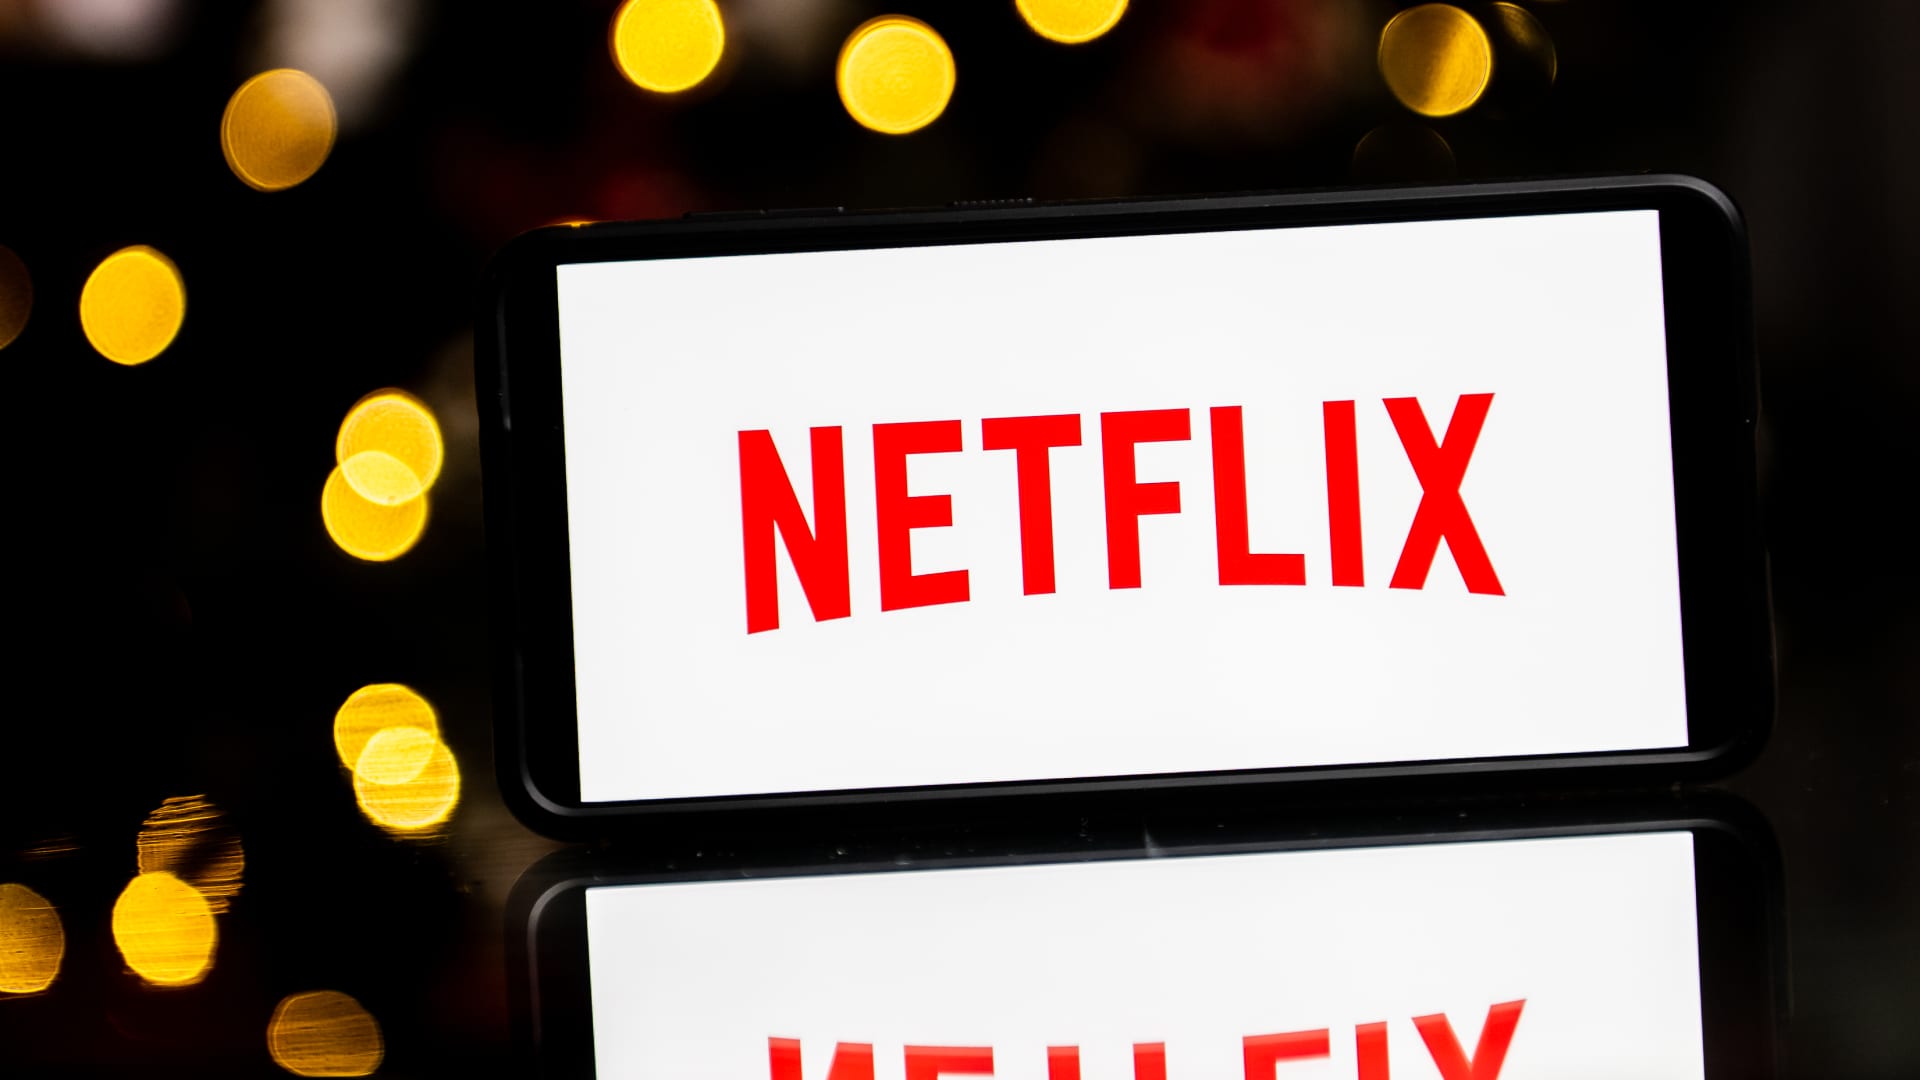 Netflix subscriptions jump 8%, revenue climbs as password sharing crackdown takes hold